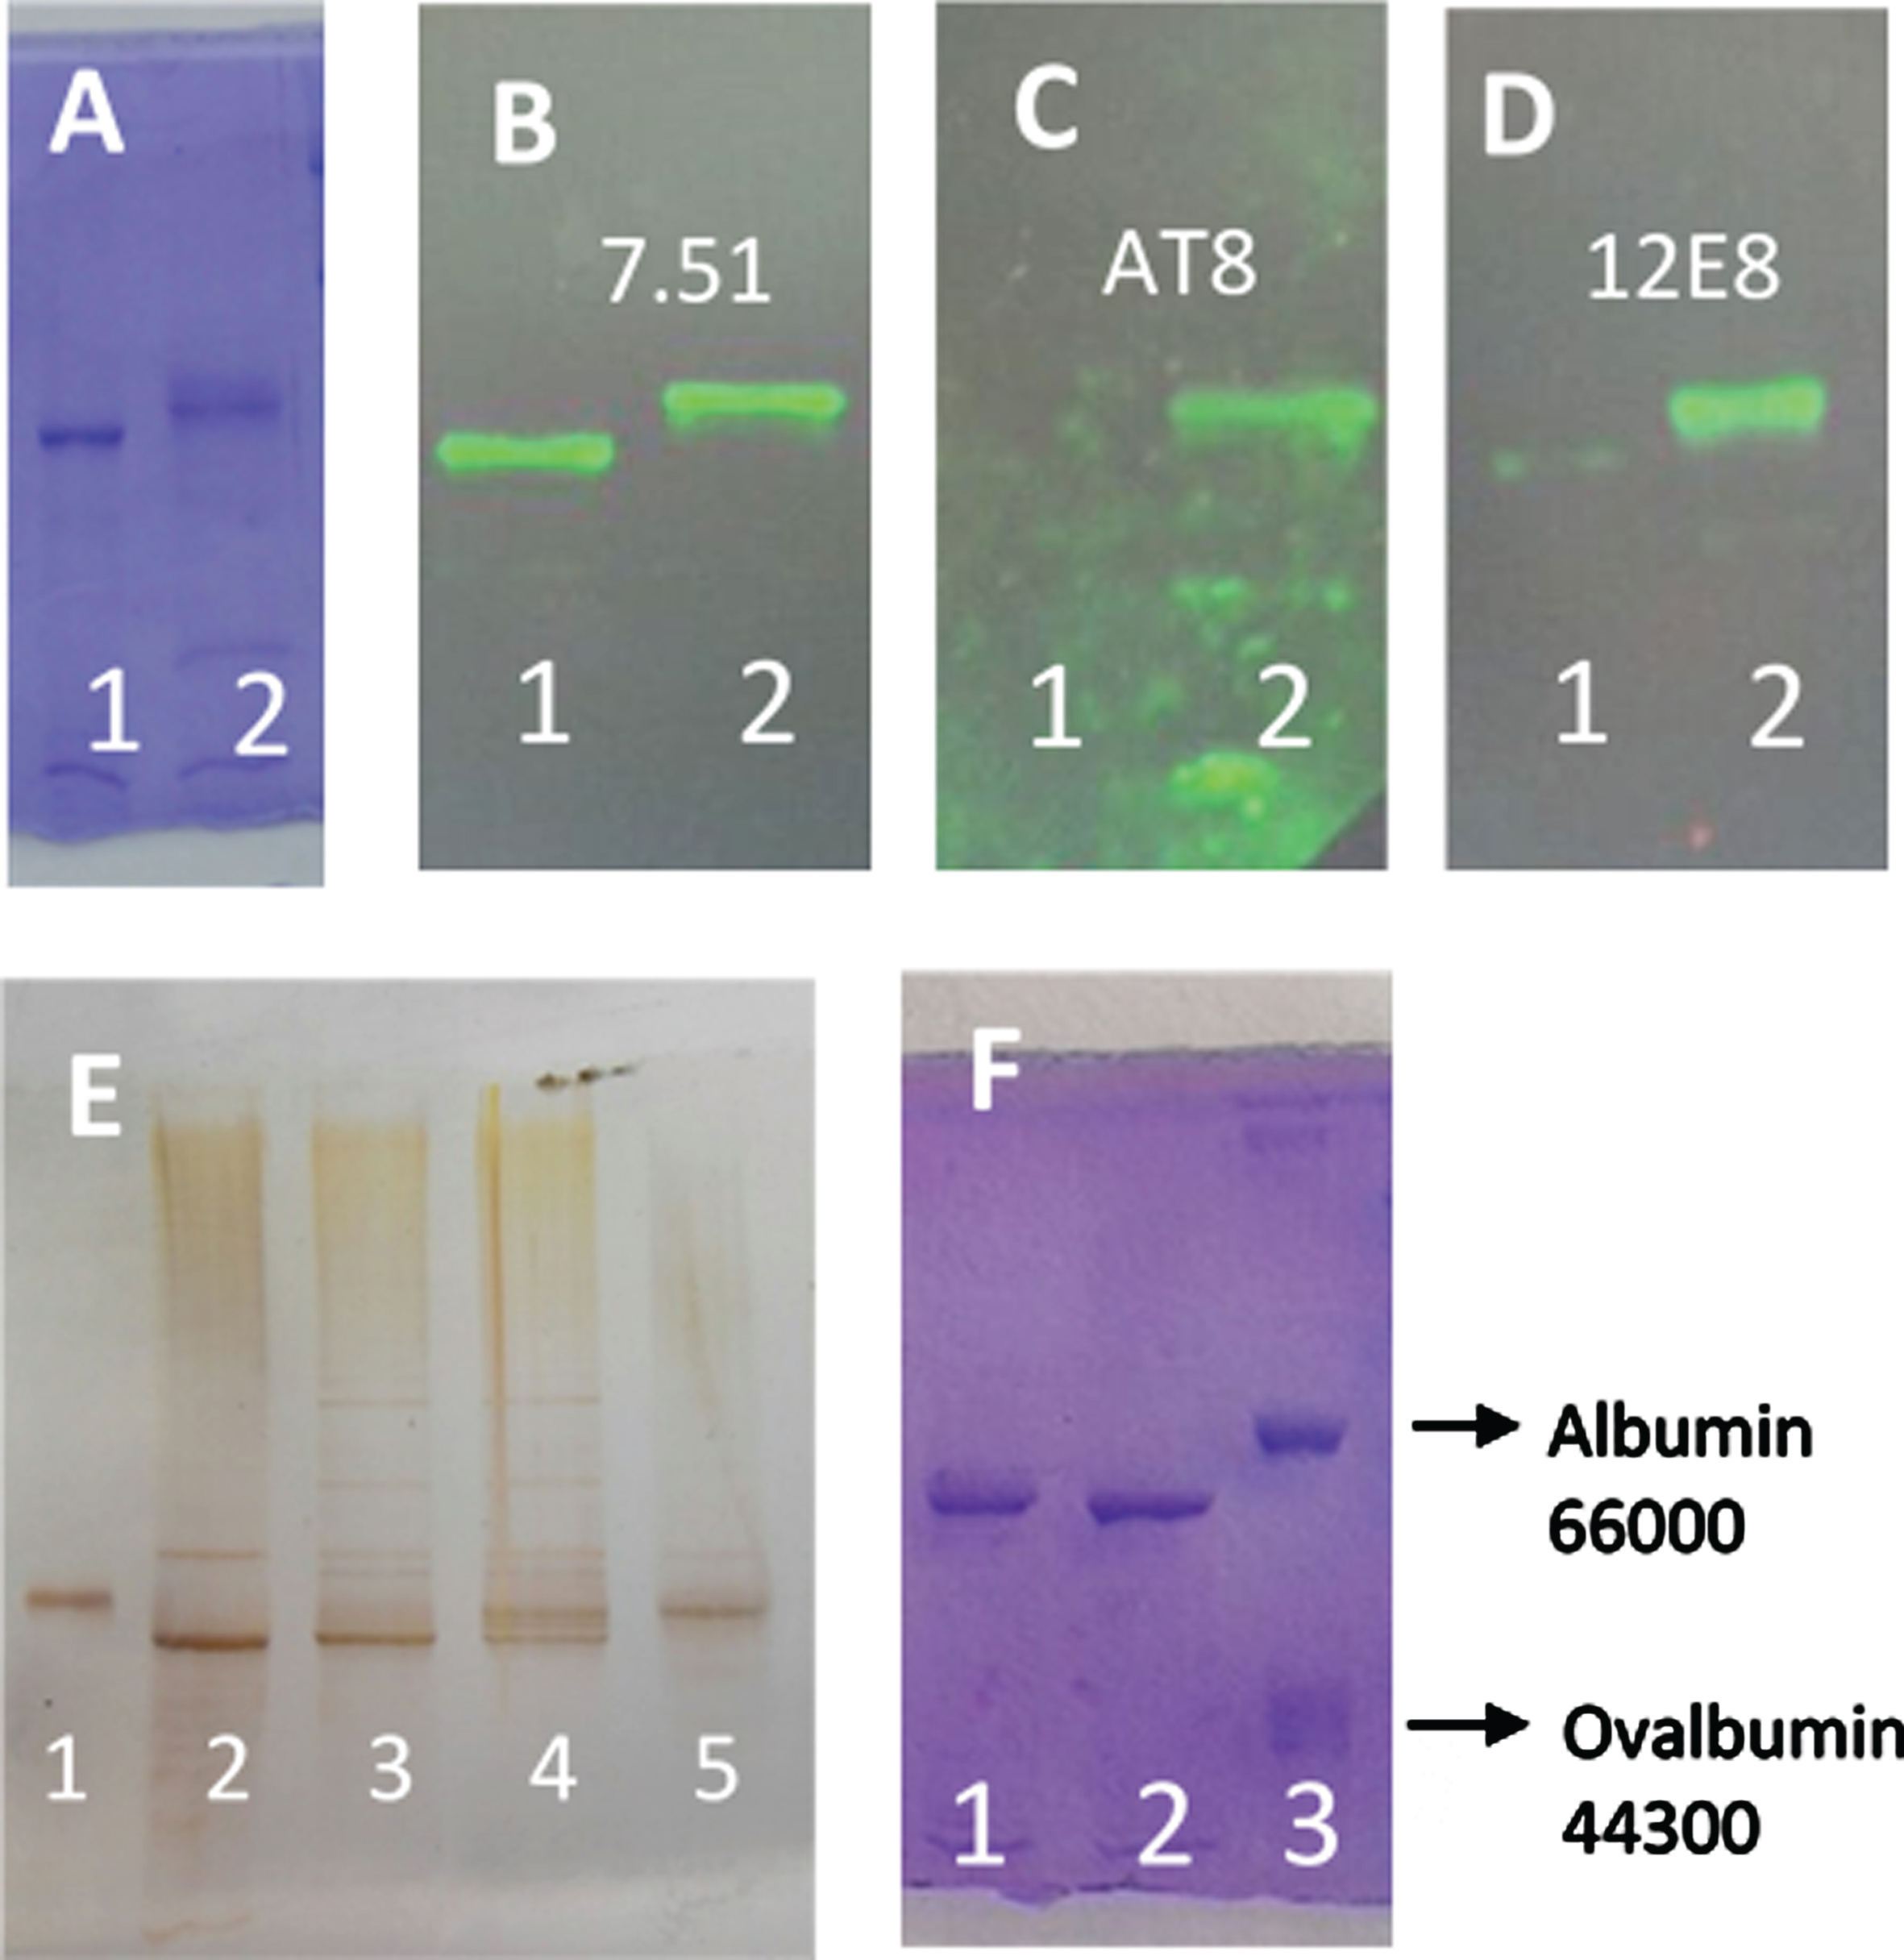 SDS-PAGE (8% of polyacrylamide) of different forms of tau protein. A) Lane 1, tau protein (0.05 mg/ml) incubated for 4 h at 37°C in the presence of MgCl2 (10 mM), EGTA (0.25 mM), 2-mercaptoethanol (0.25 mM), Hepes (5 mM), and NaCl (50 mM), pH 7. Lane 2, the same tau protein incubation as Lane 1, but in the presence of ATP (2 mM) and C-PKA (4 units). B-D) Tau protein incubated as in (A) showing the western blots using antibody 7.51 to total tau (B), AT8 to Ser 202 and Thr 205 (C), and 12E8 to Ser 262 and Ser 356 (D). E) Silver stained of different forms of tau protein. Lane 1, Albumin used as a control. Lane 2, tau protein. Lanes 3 and 4, tau protein (3.6 ng/μl) incubated with ATP (5 mM) and C-PKA for 2.5 h (lane 3) and 17 h (lane 4). Lane 5 shows the phosphorylated tau protein prepared as described in the Materials and Methods. The amounts of tau and albumin loaded in lanes 1 and 2 were approximately 70 and 60 ng respectively. F) shows tau protein (0.05 mg/ml) incubated for 1 h with ATP 0.1 mM in the absence (lane 2) or the presence of C-PKA (lane 1). Lane 3 shows a mixture of bovine serum albumin and ovalbumin used as controls.